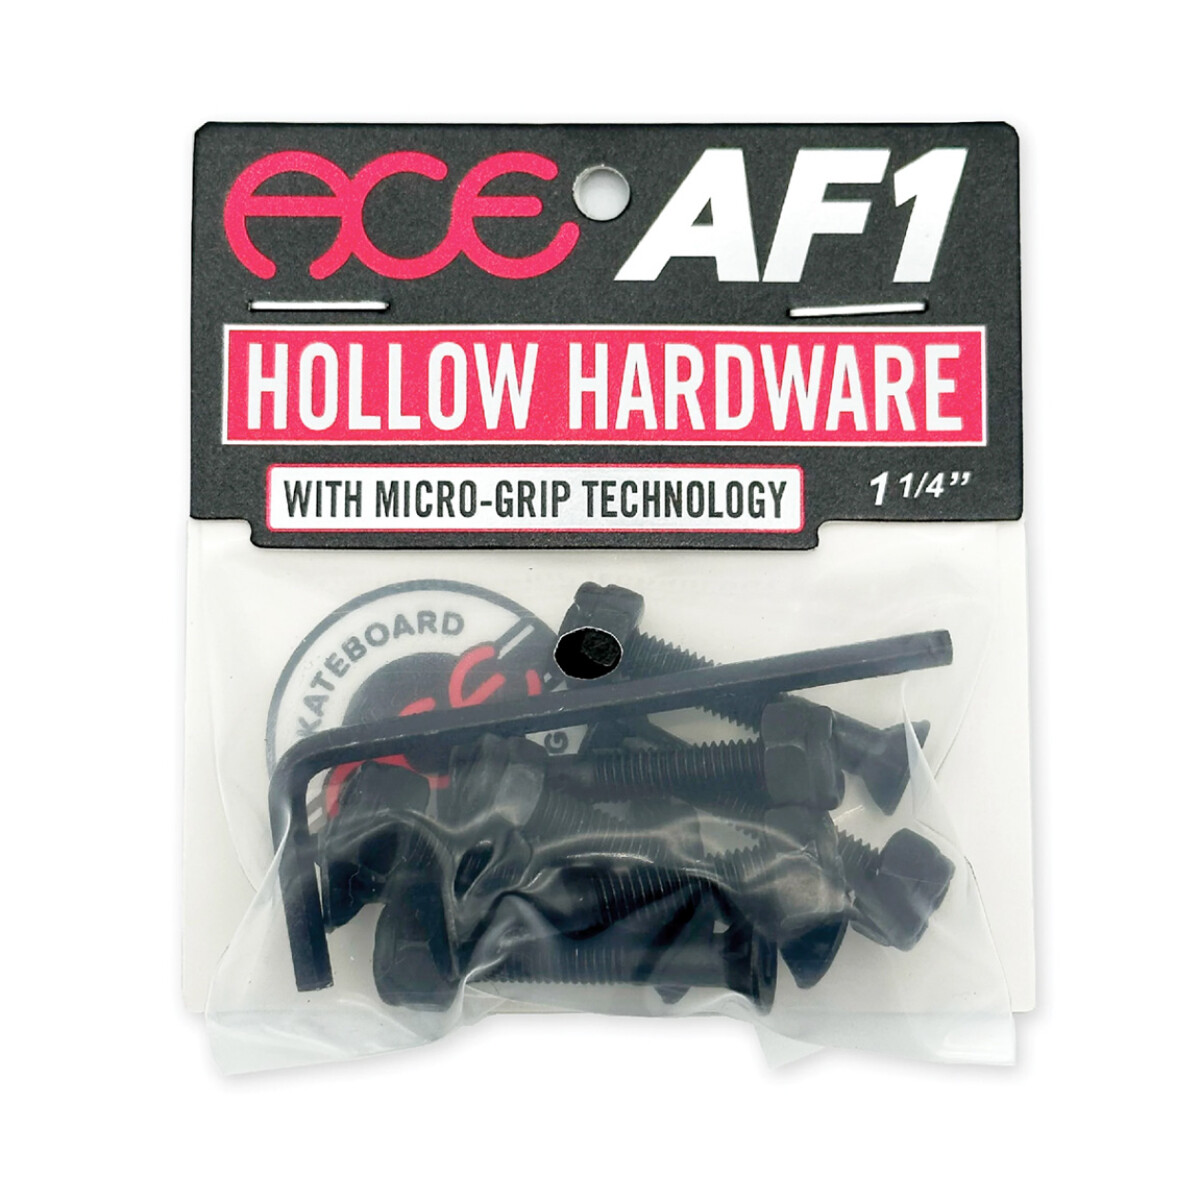 Tornillos Ace Hollow Allen con Grippers 1 1/4" 